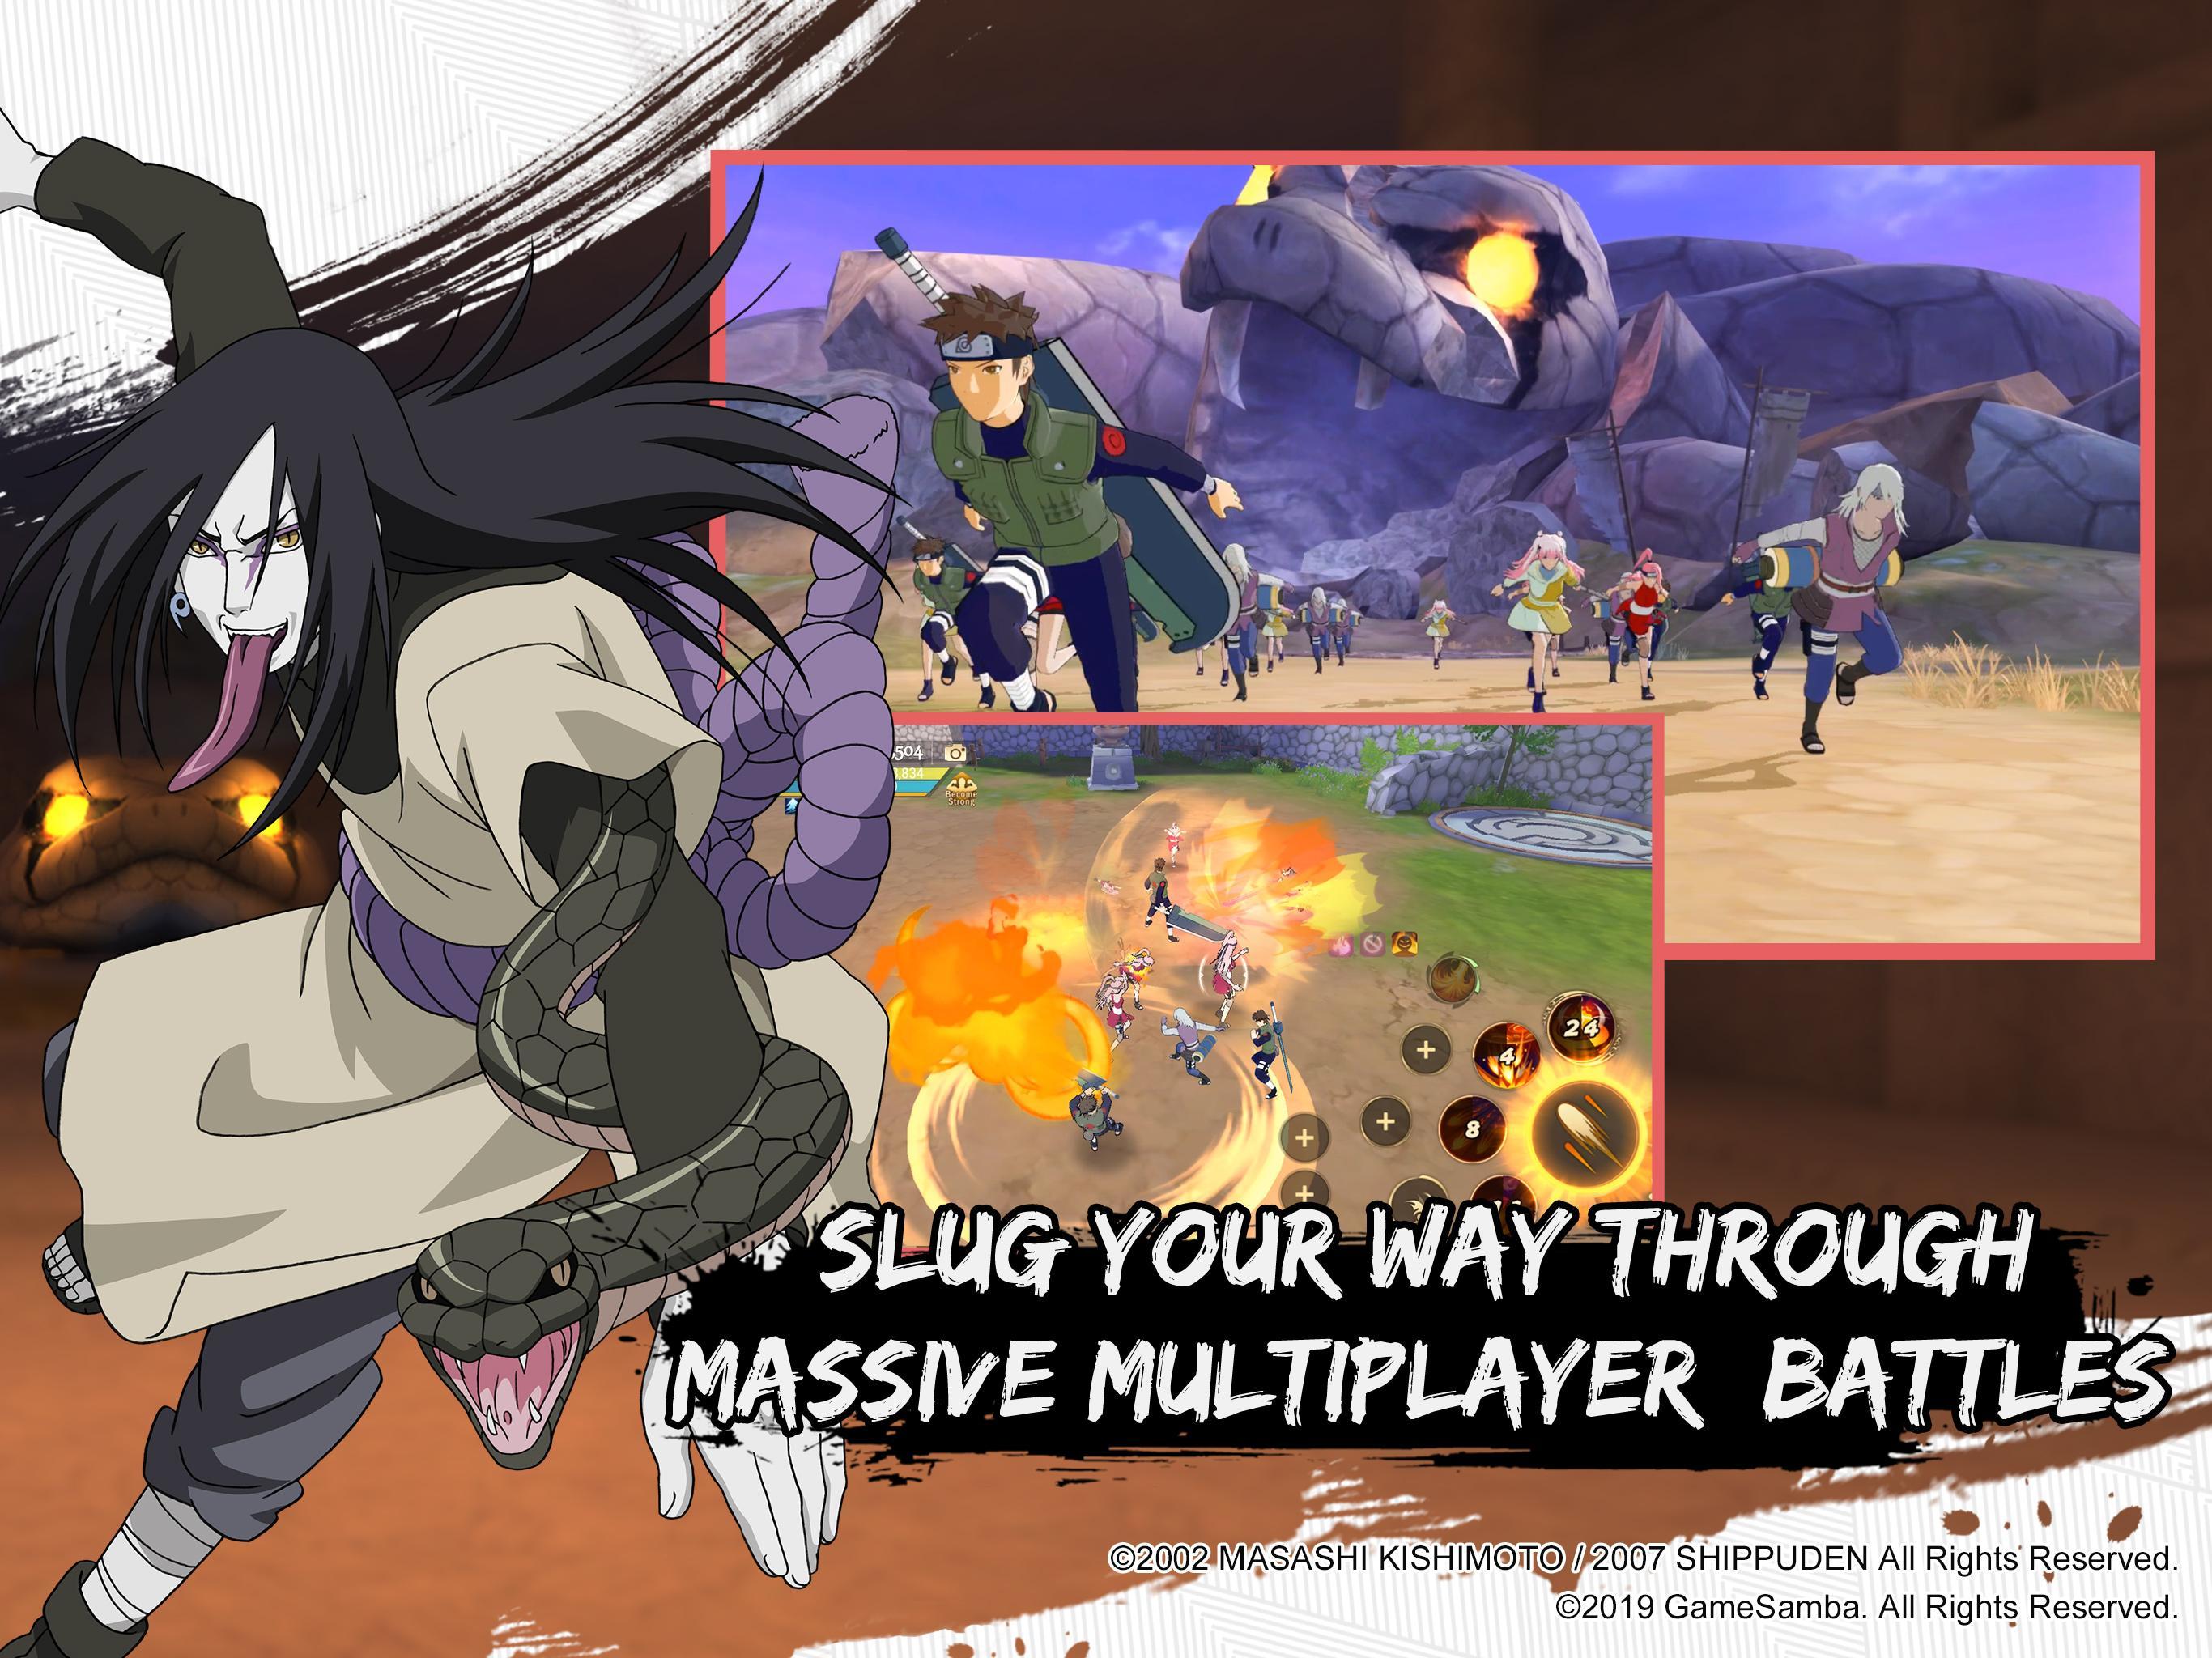 HOW TO DOWNLOAD & PLAY (LOGIN) NARUTO MOBILE via QQ (Android/iOS